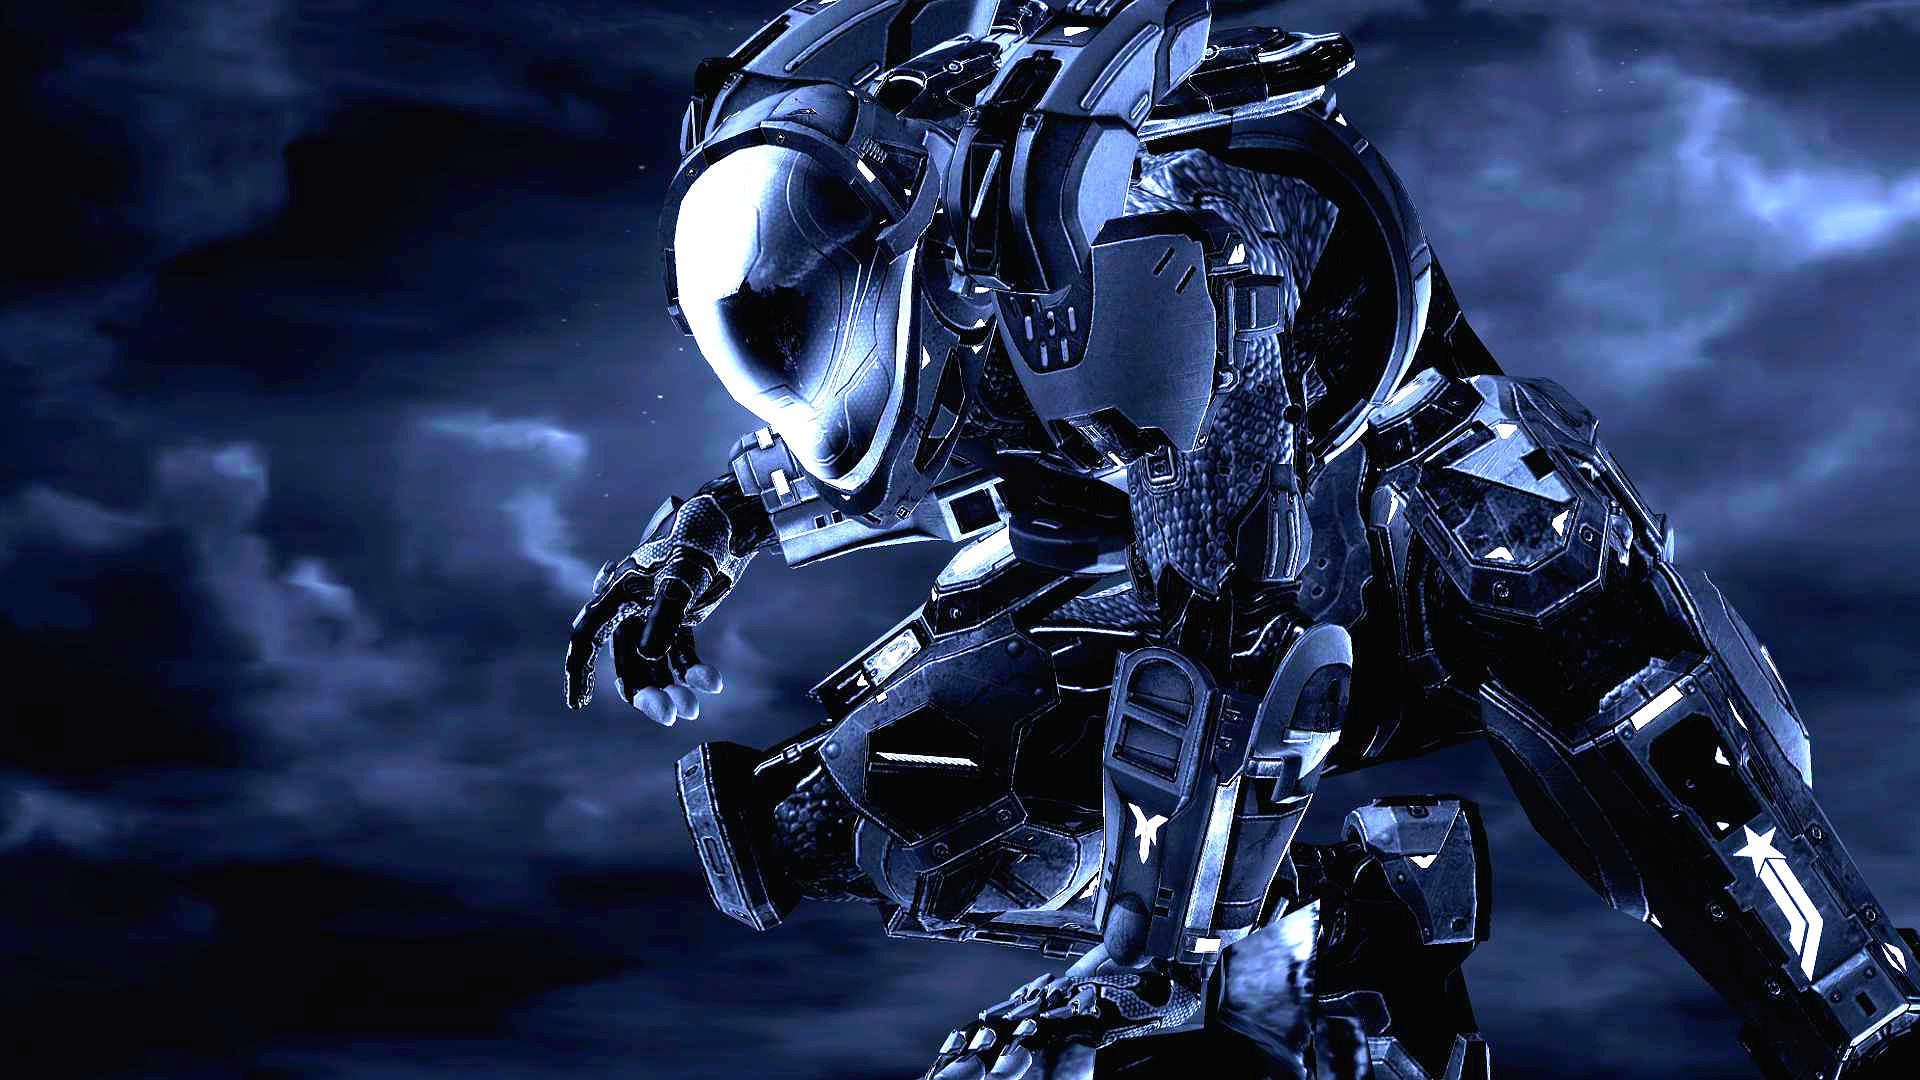 Halo Wallpaper Fine HDq Pictures Magnificent